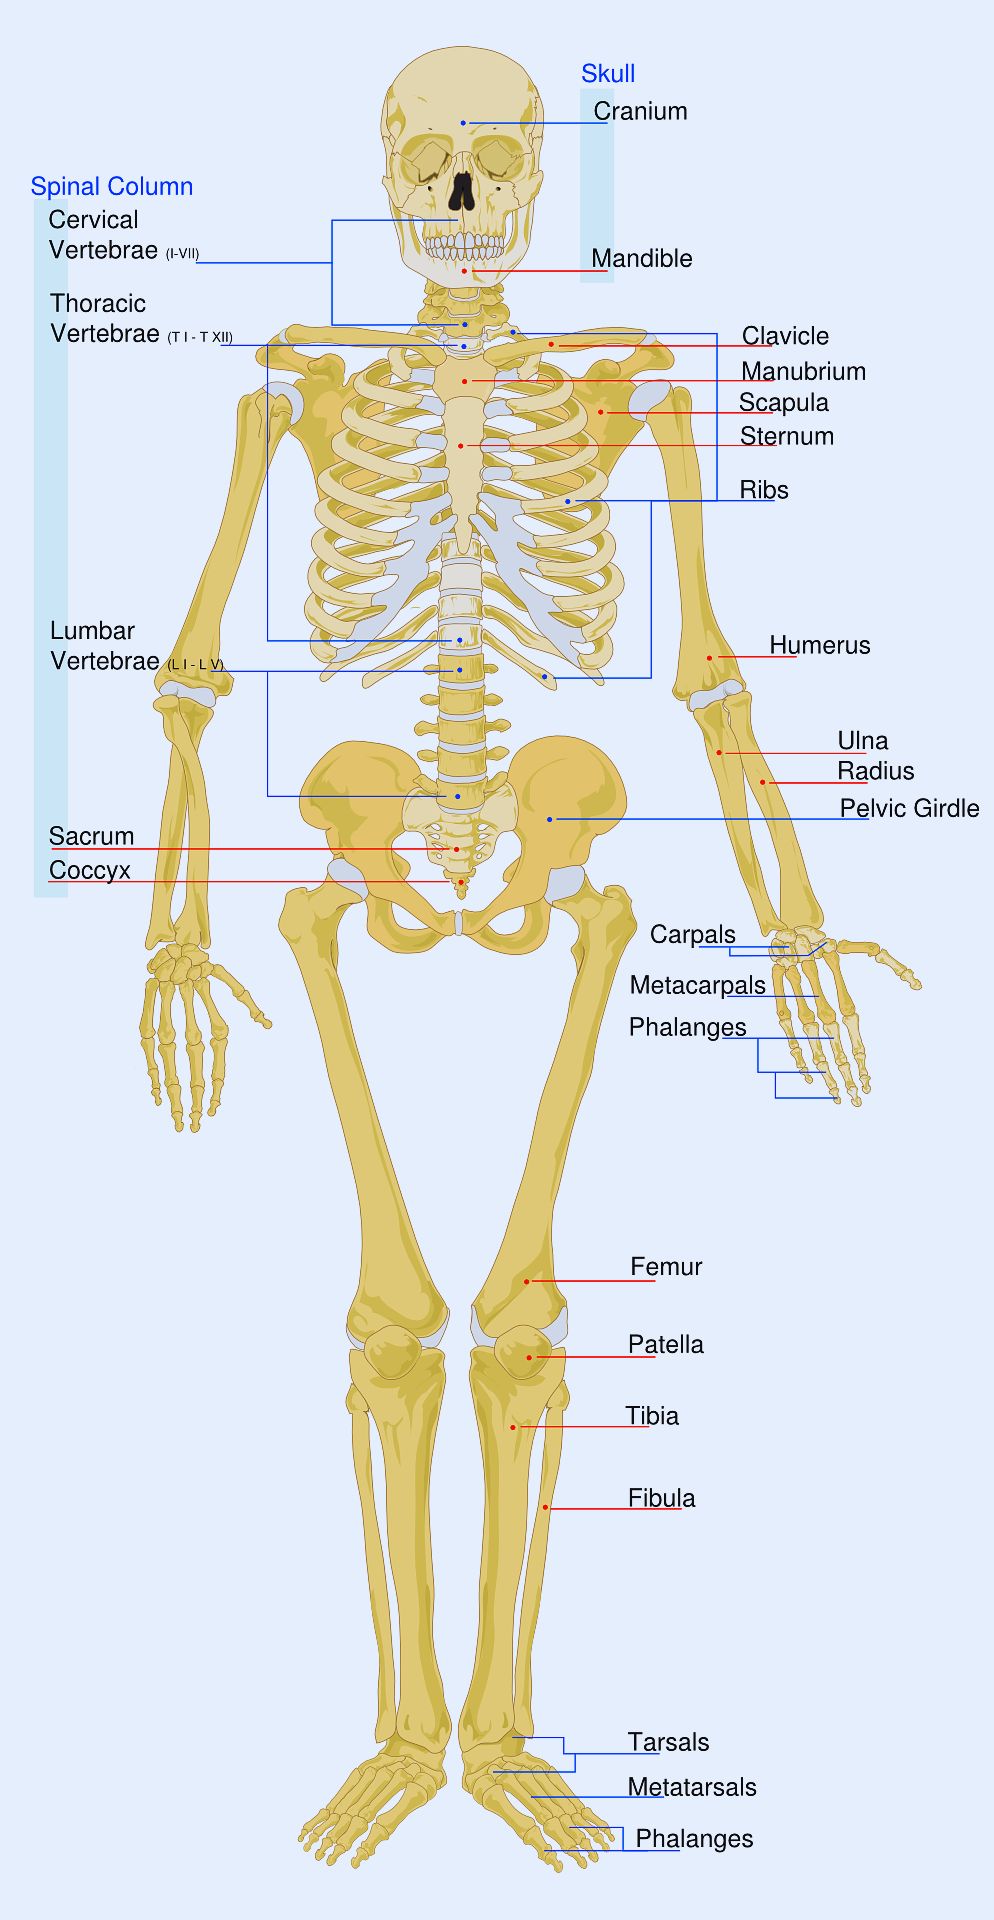 Body parts name - the skeletal system